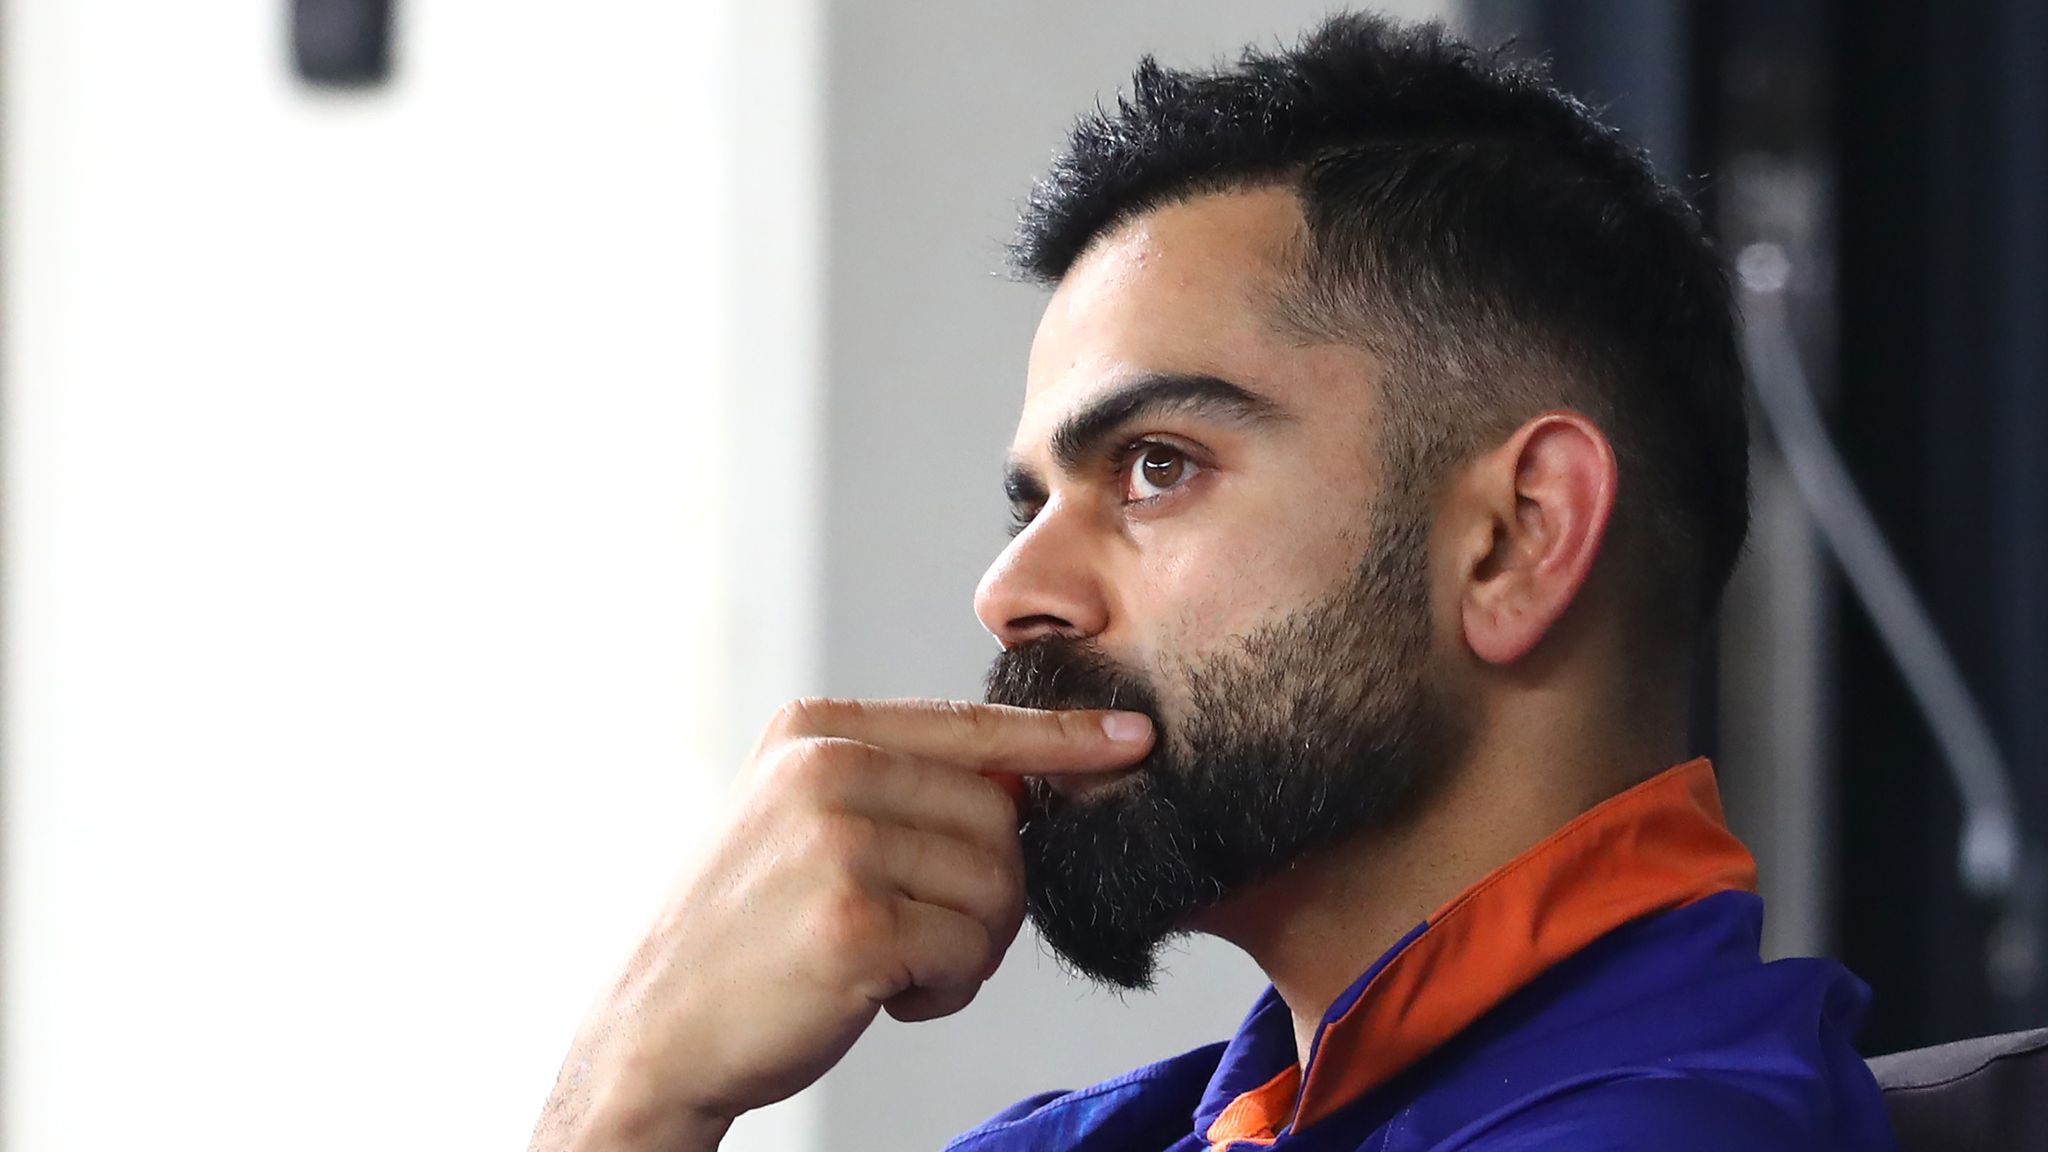 India Today - Virat Kohli flaunts his new hairstyle ahead of Asia Cup 2023.  He looks uber-cool. What do you think? #ViratKohli #AsiaCup2023 # NewHairstyle #Haircut | Facebook